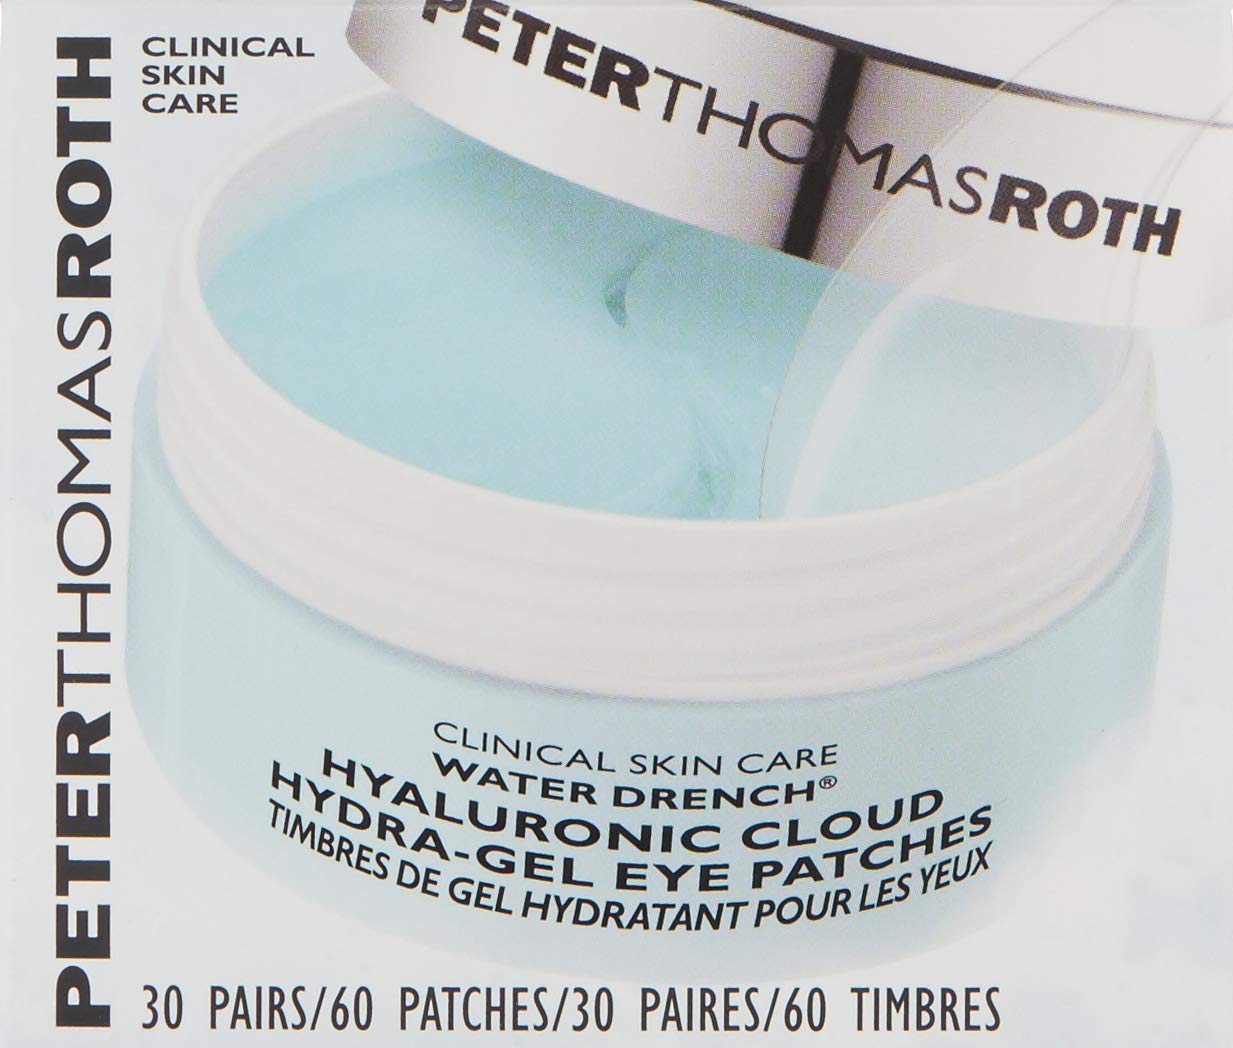 Peter Thomas Roth | Water Drench Hyaluronic Cloud Hydra-Gel Eye Patches | Hyaluronic Acid Under-Eye Patches for Fine Lines, Wrinkles and Puffiness